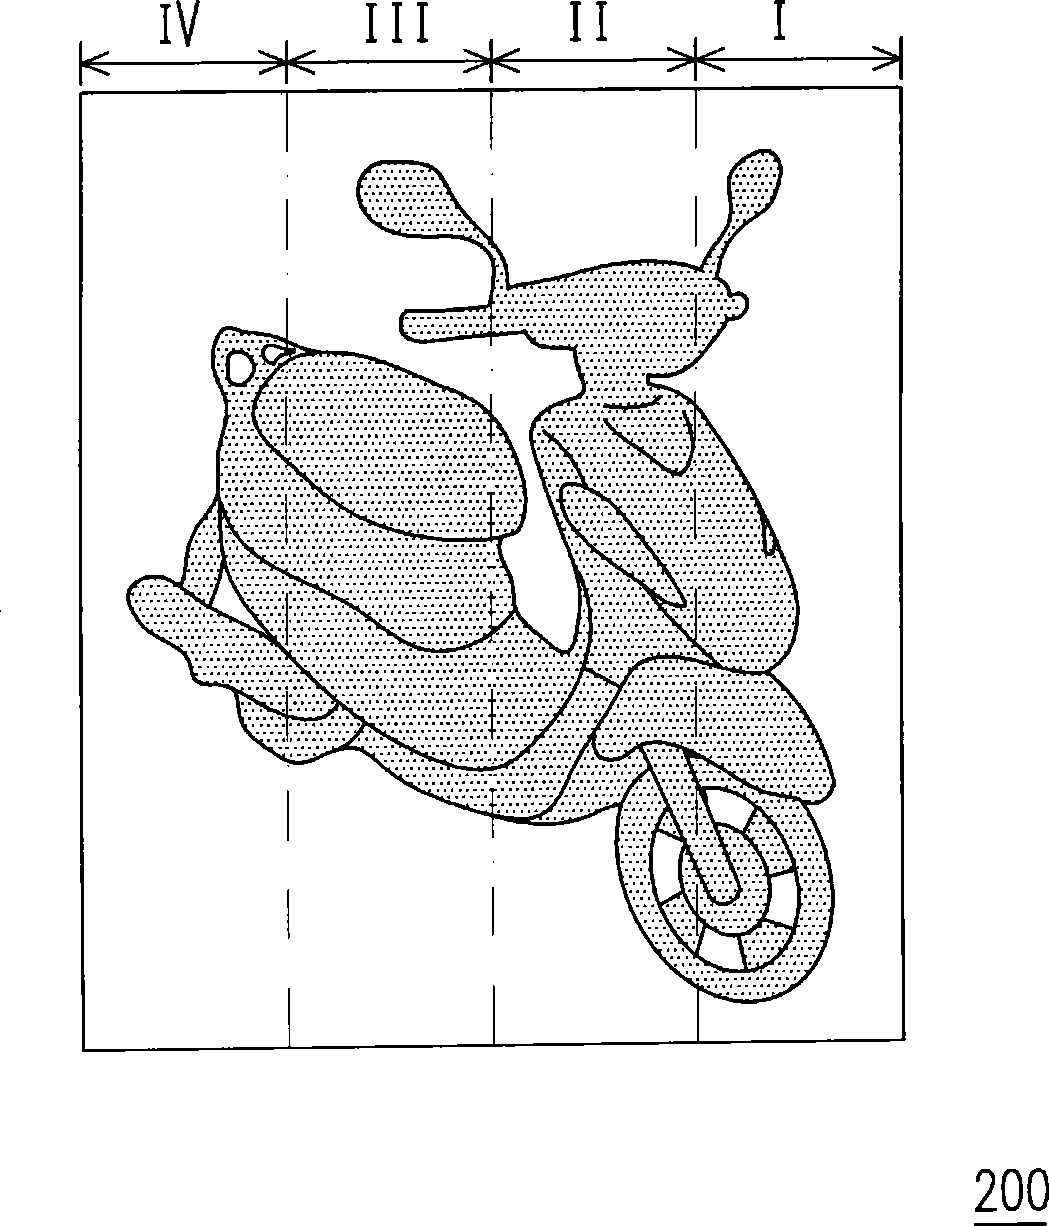 Depth field fusion type steroscopic display, and drive method and drive circuit thereof